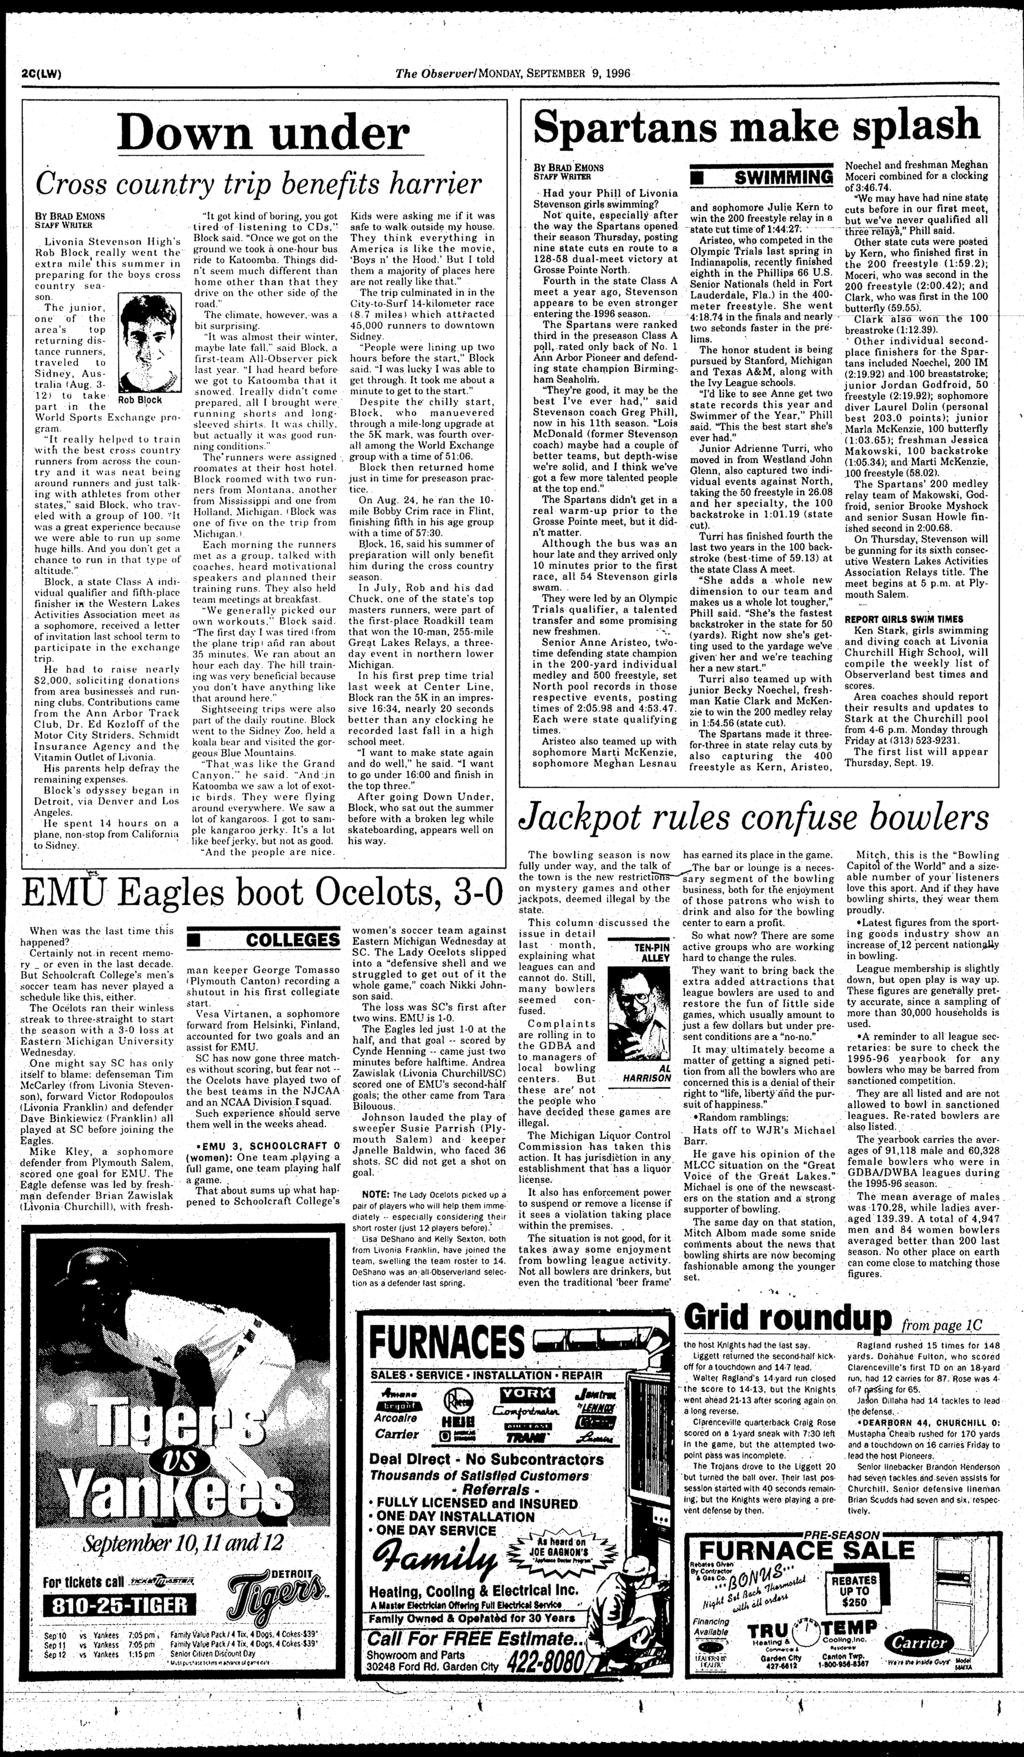 2C(LW) The Observer/Mom AY, SEPTEMBER 9, 1996 Down under Spartans make s Cross country trp benefts harrer BY BRAD EMONS STAFF WRTER Lvona Stevenson Hghs Rob Block really went the extra mle ths summer